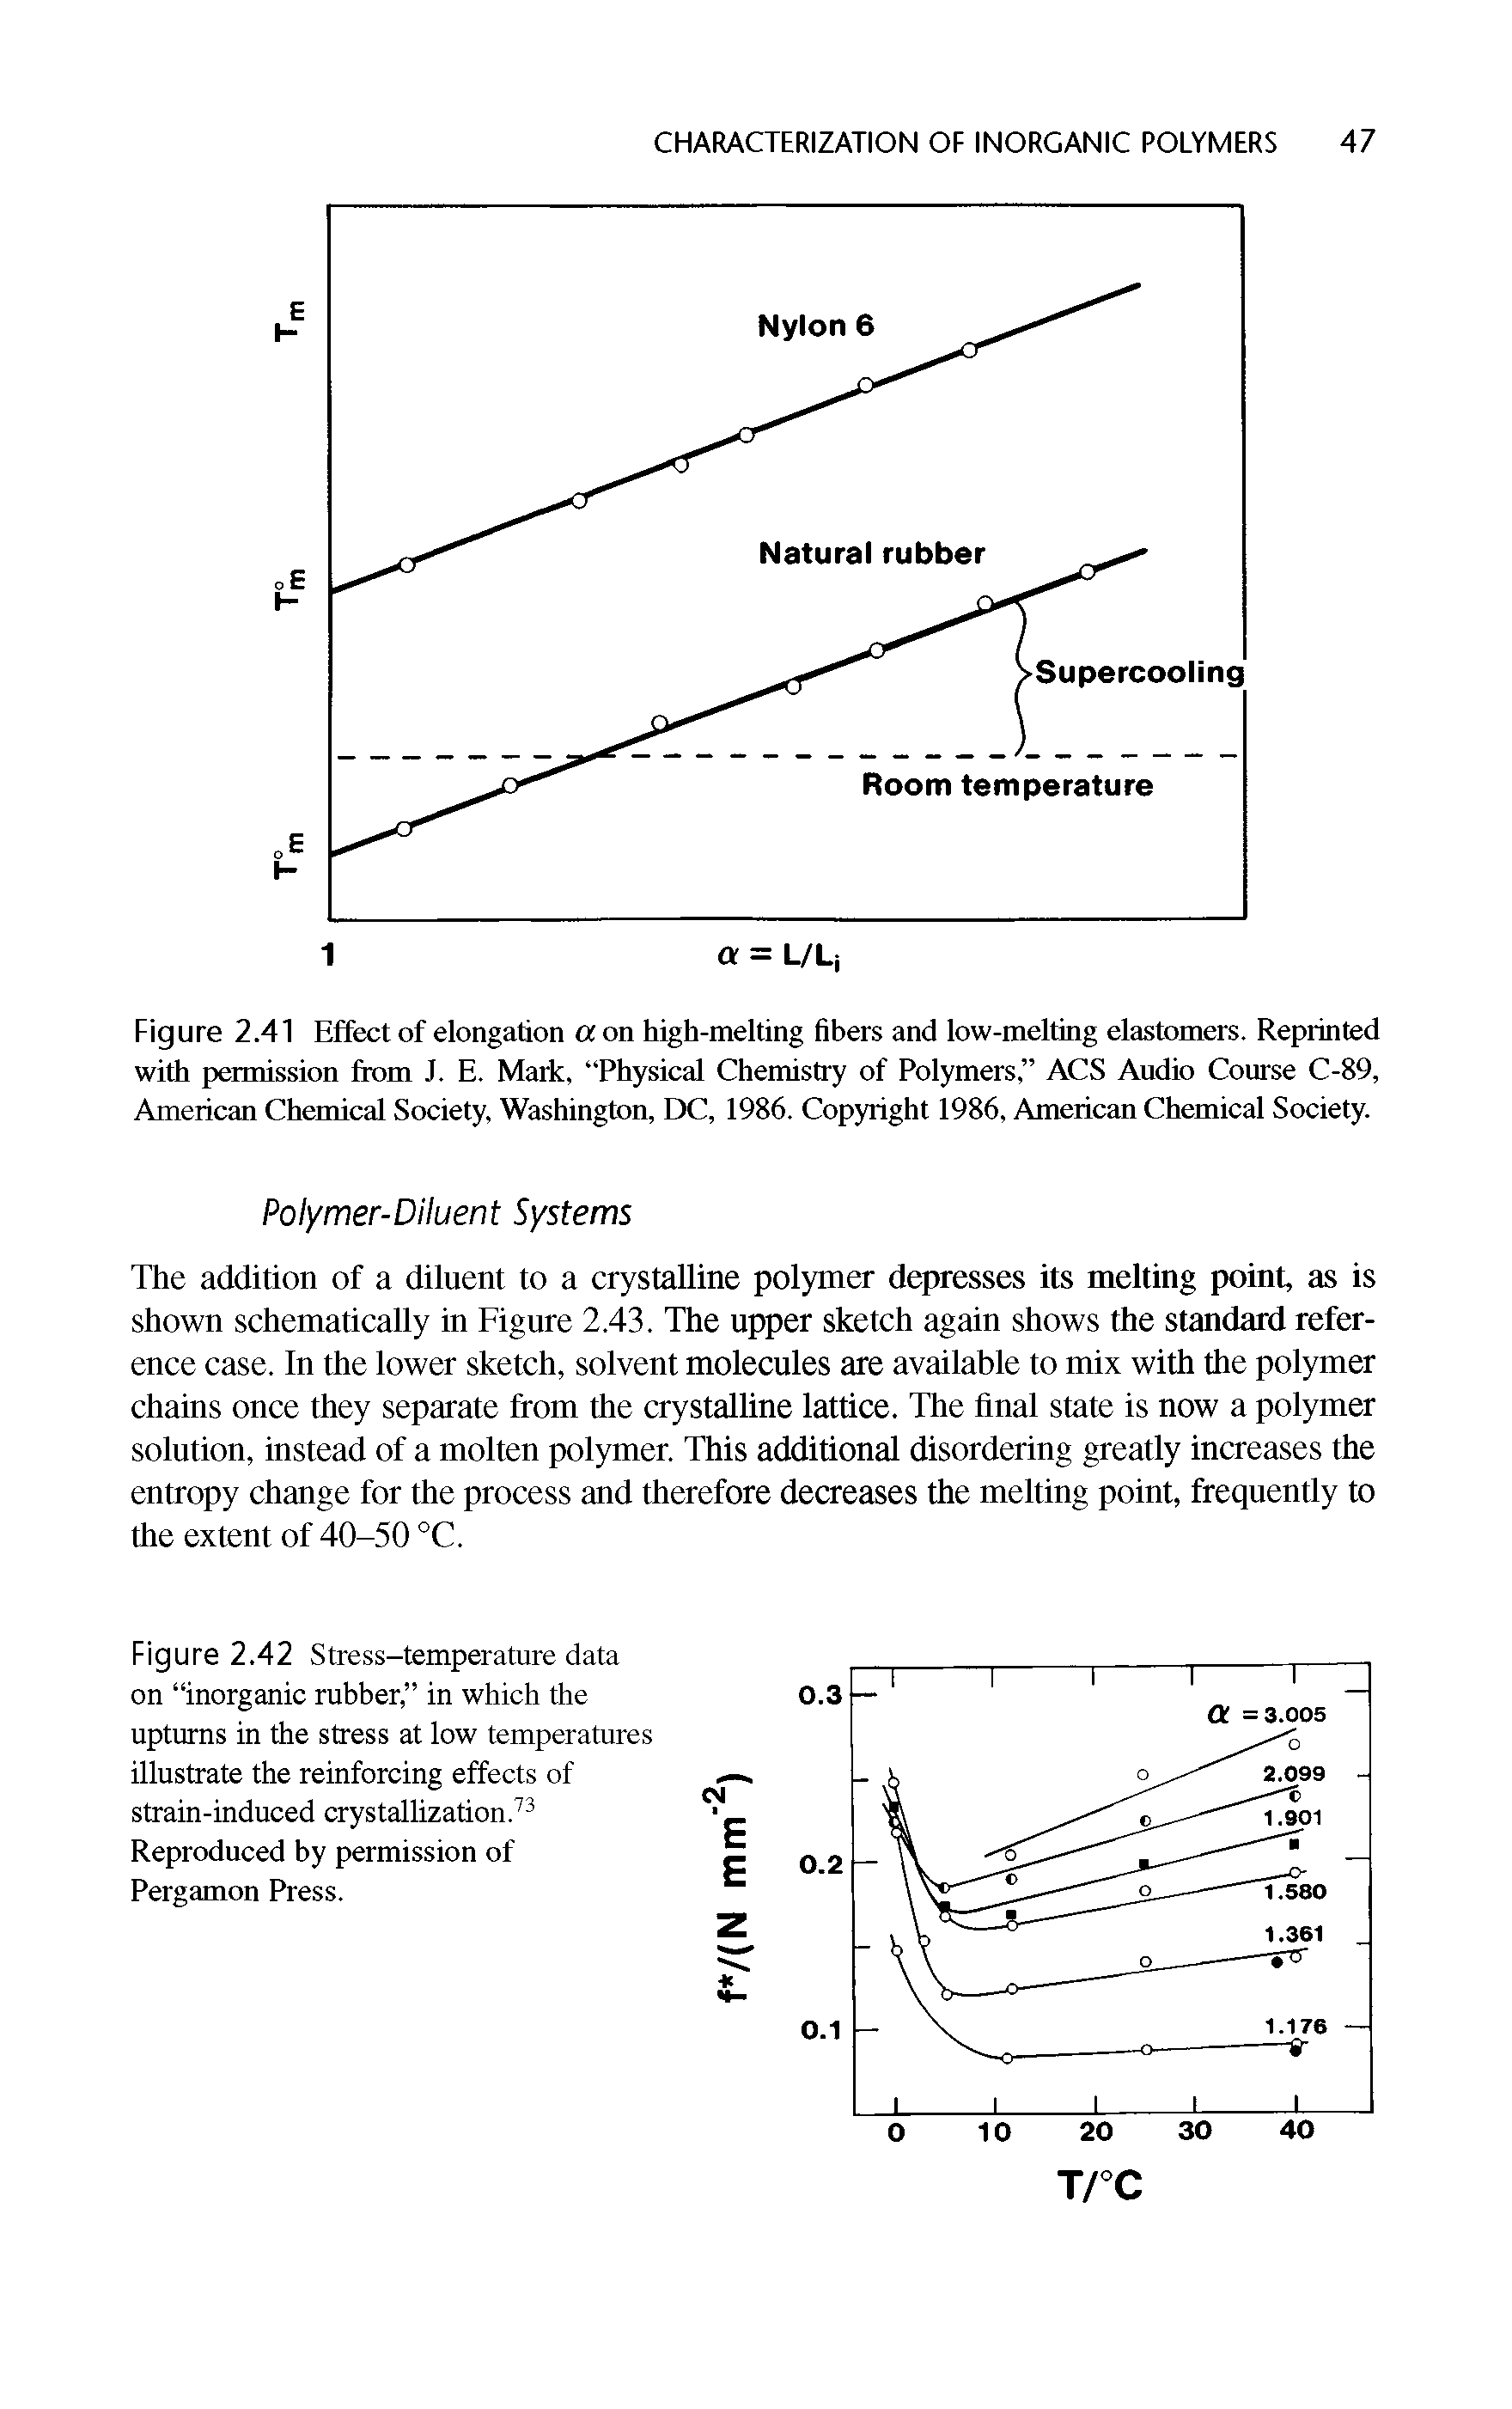 Figure 2.42 Stress-temperature data on inorganic rubber, in which the upturns in the stress at low temperatures illustrate the reinforcing effects of strain-induced crystallization.73 Reproduced by permission of Pergamon Press.